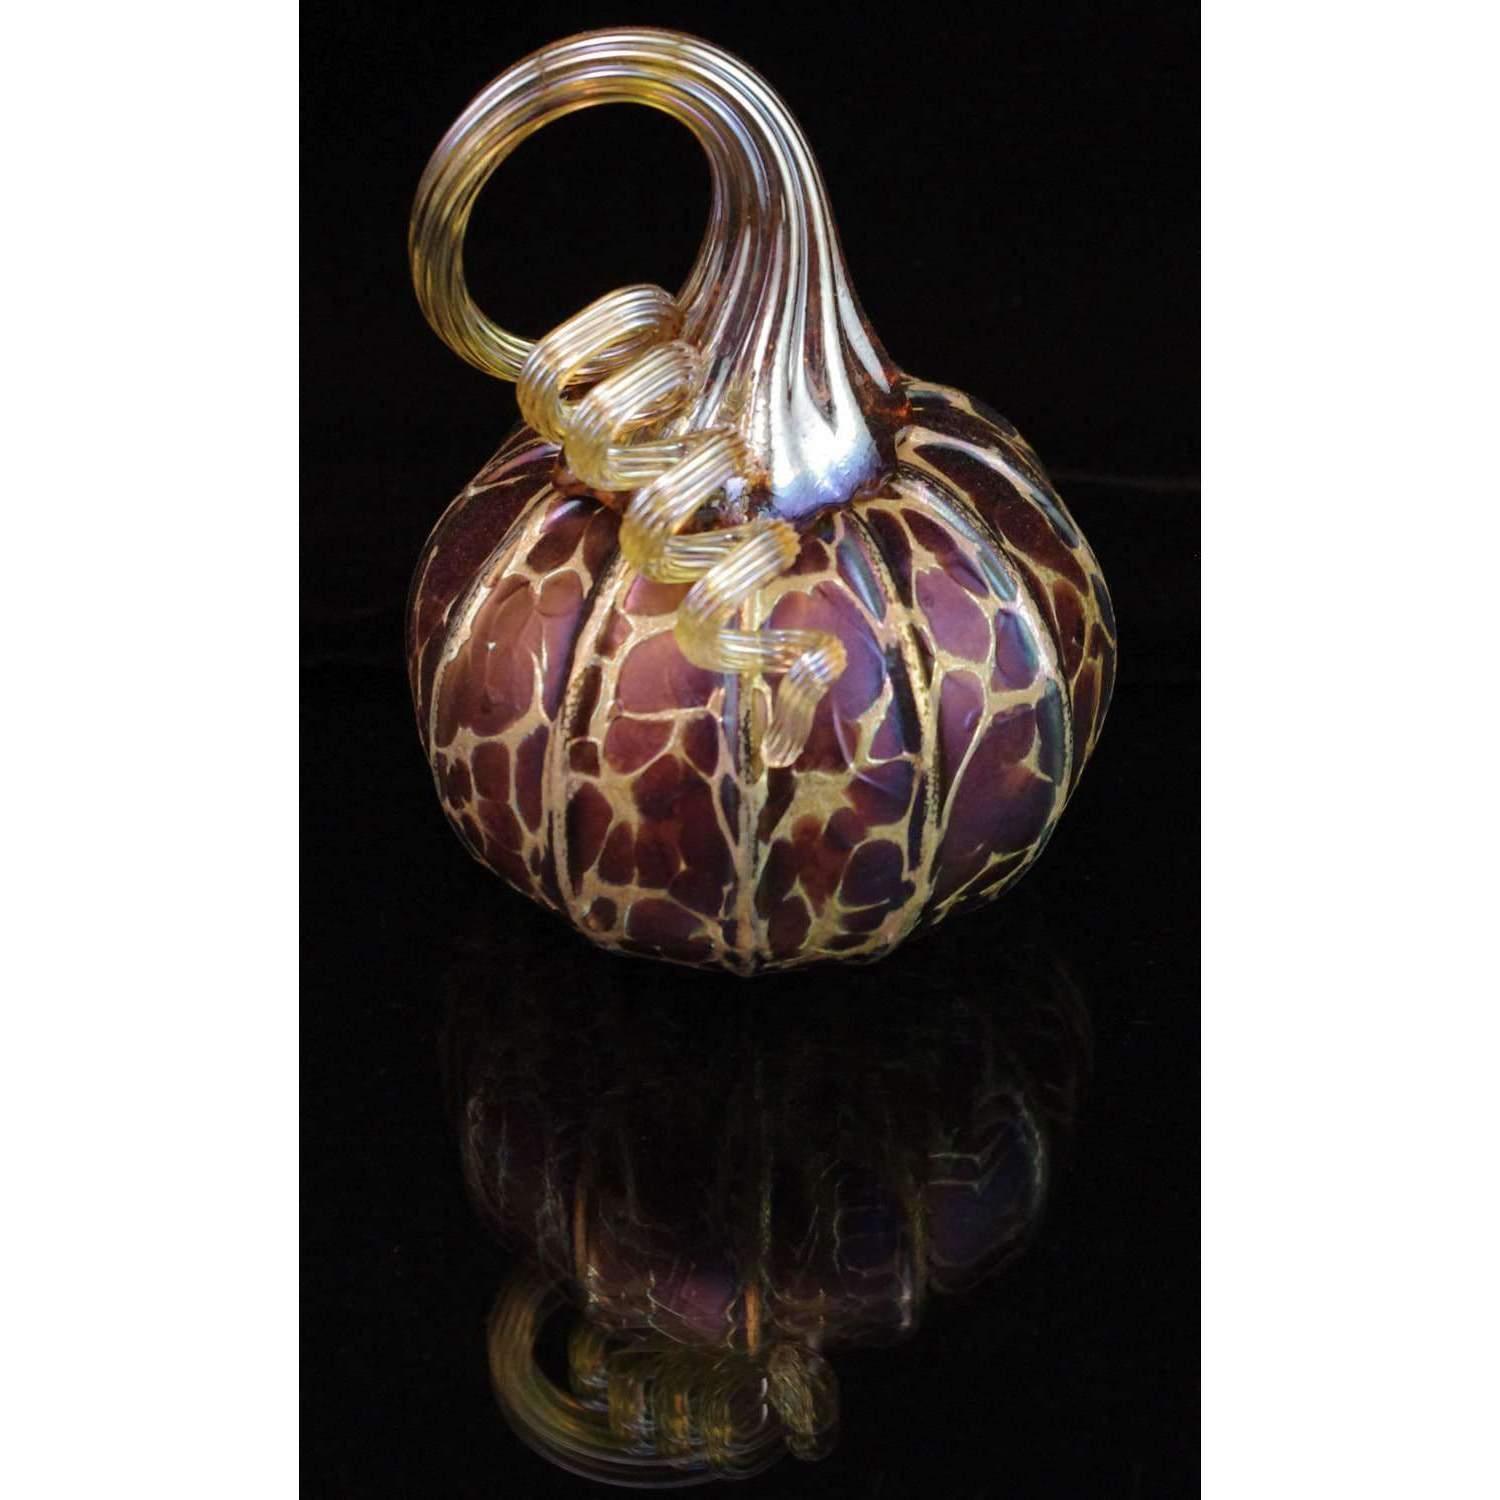 Blown Glass Pumpkin in Midnight Gifts Furnace Glass Works Large 